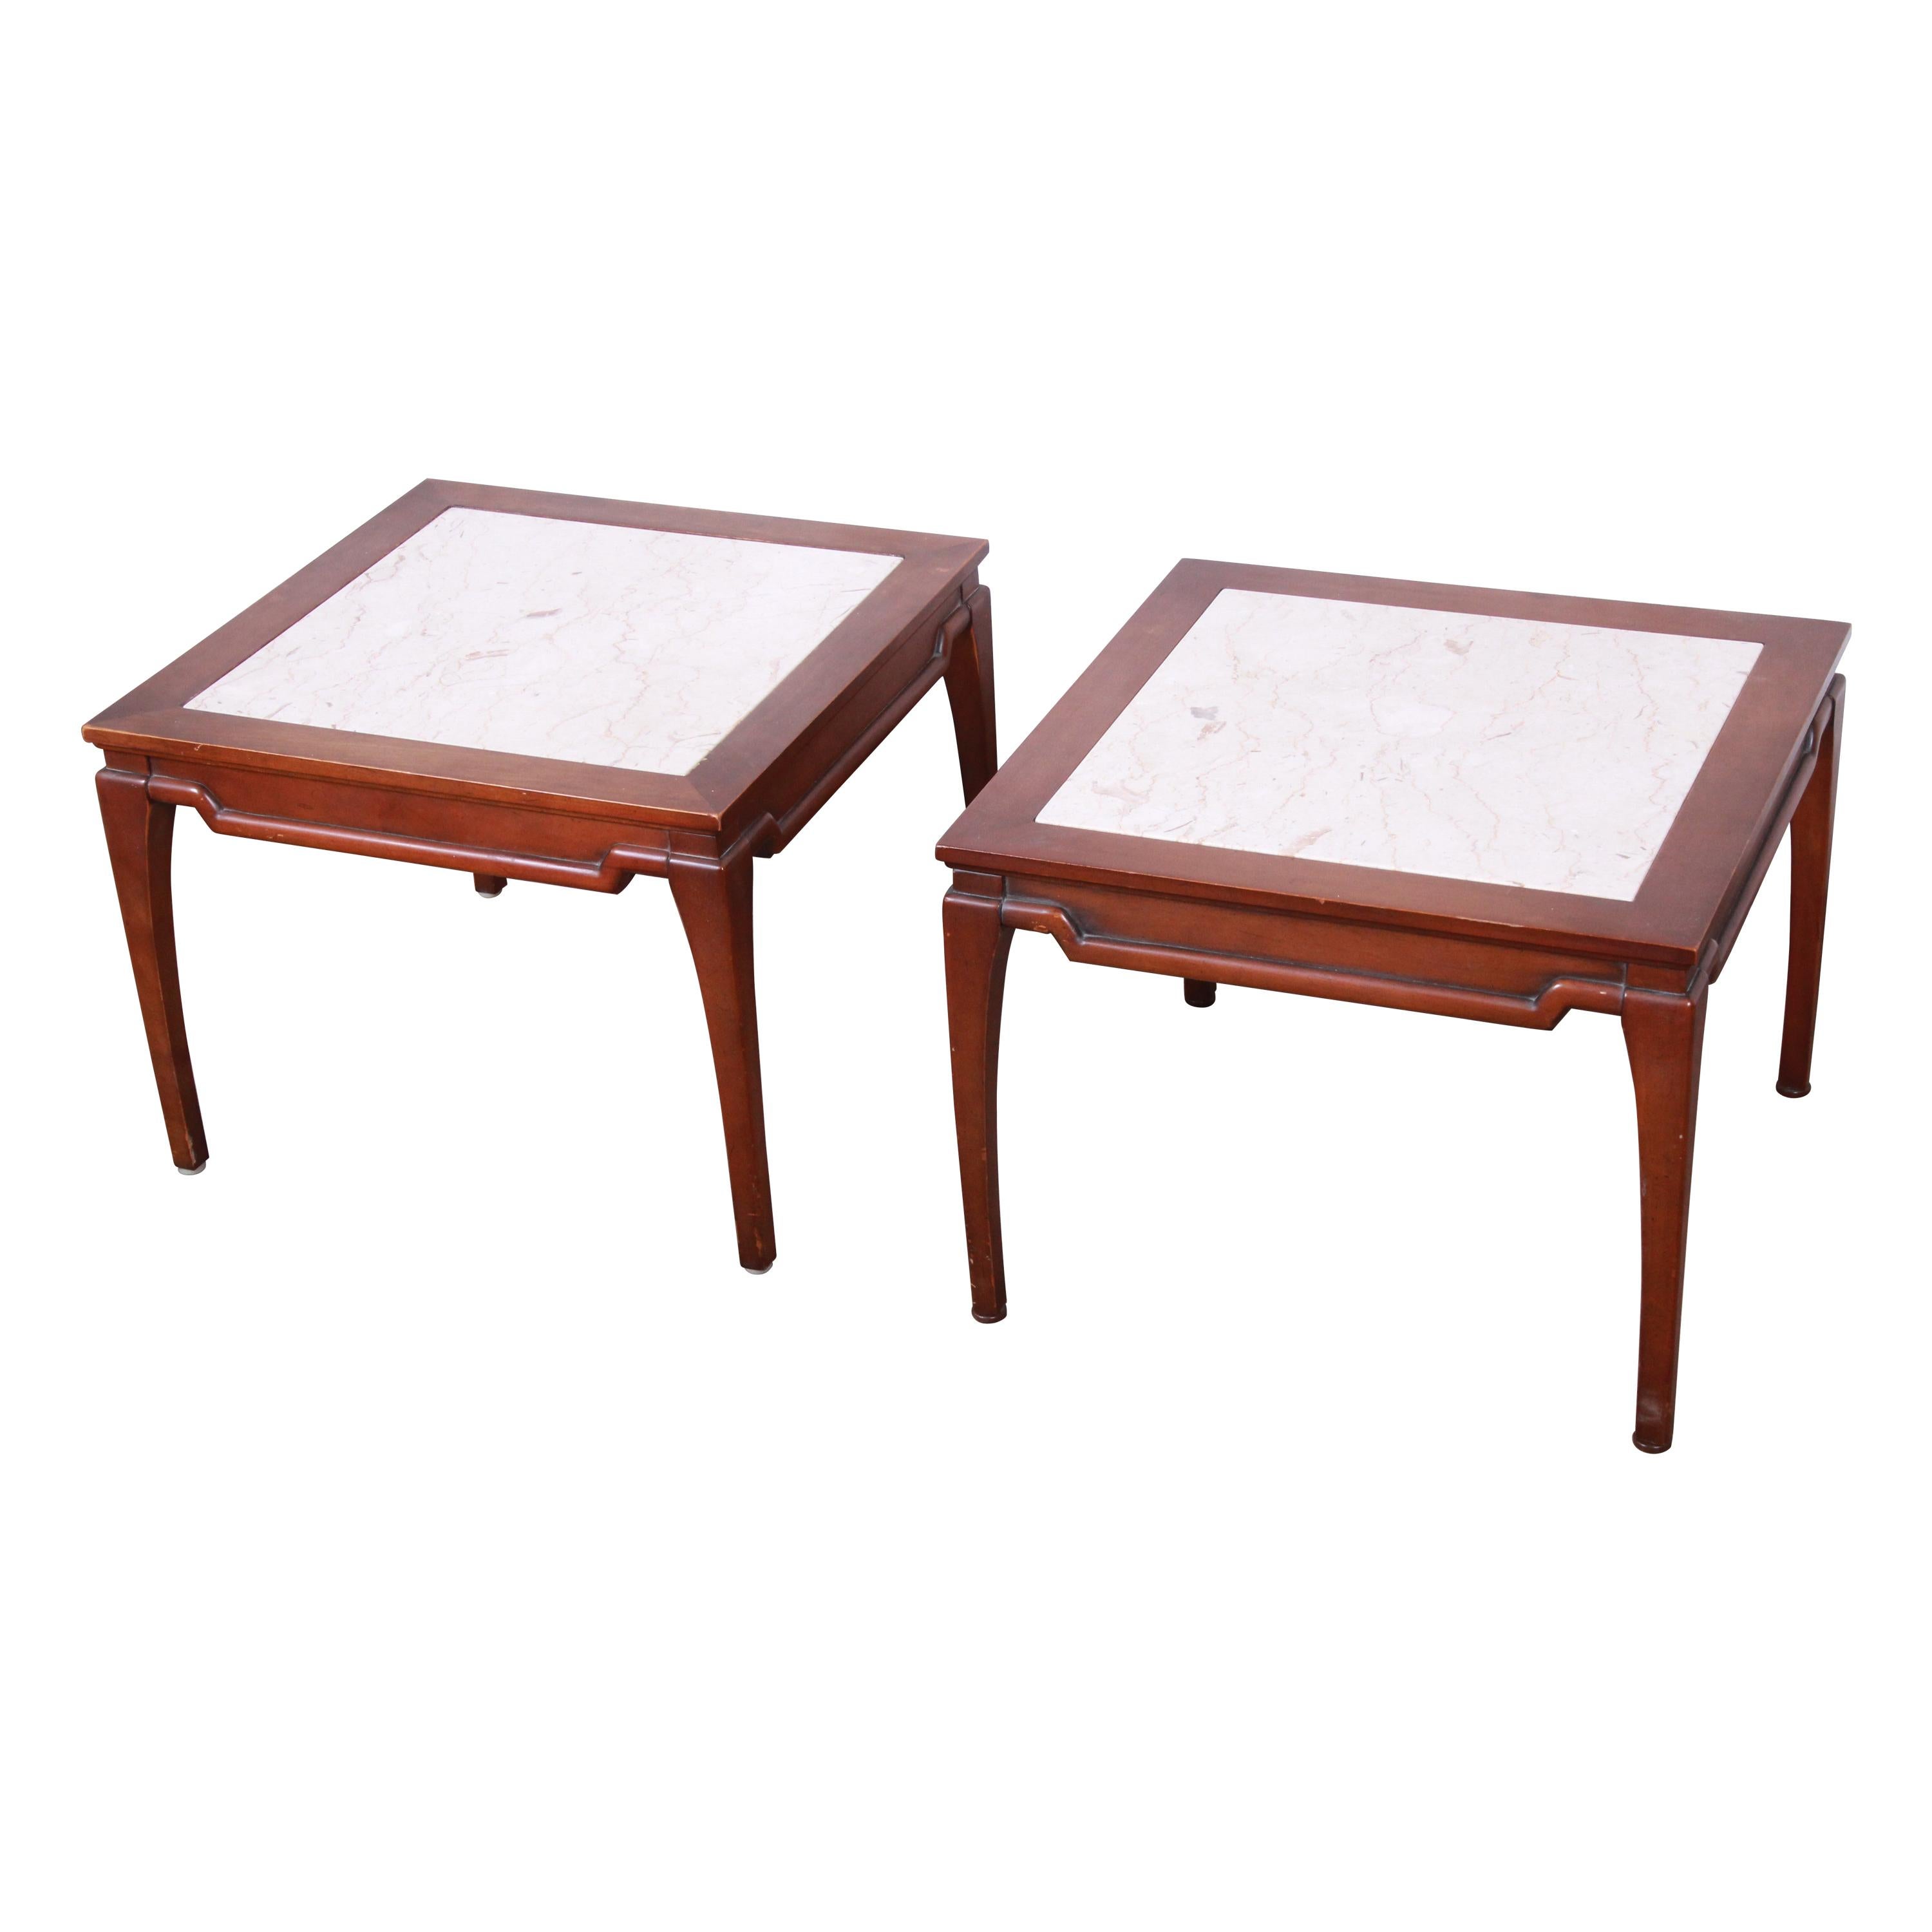 Midcentury Fruitwood Side Tables with Italian Marble Tops, Pair